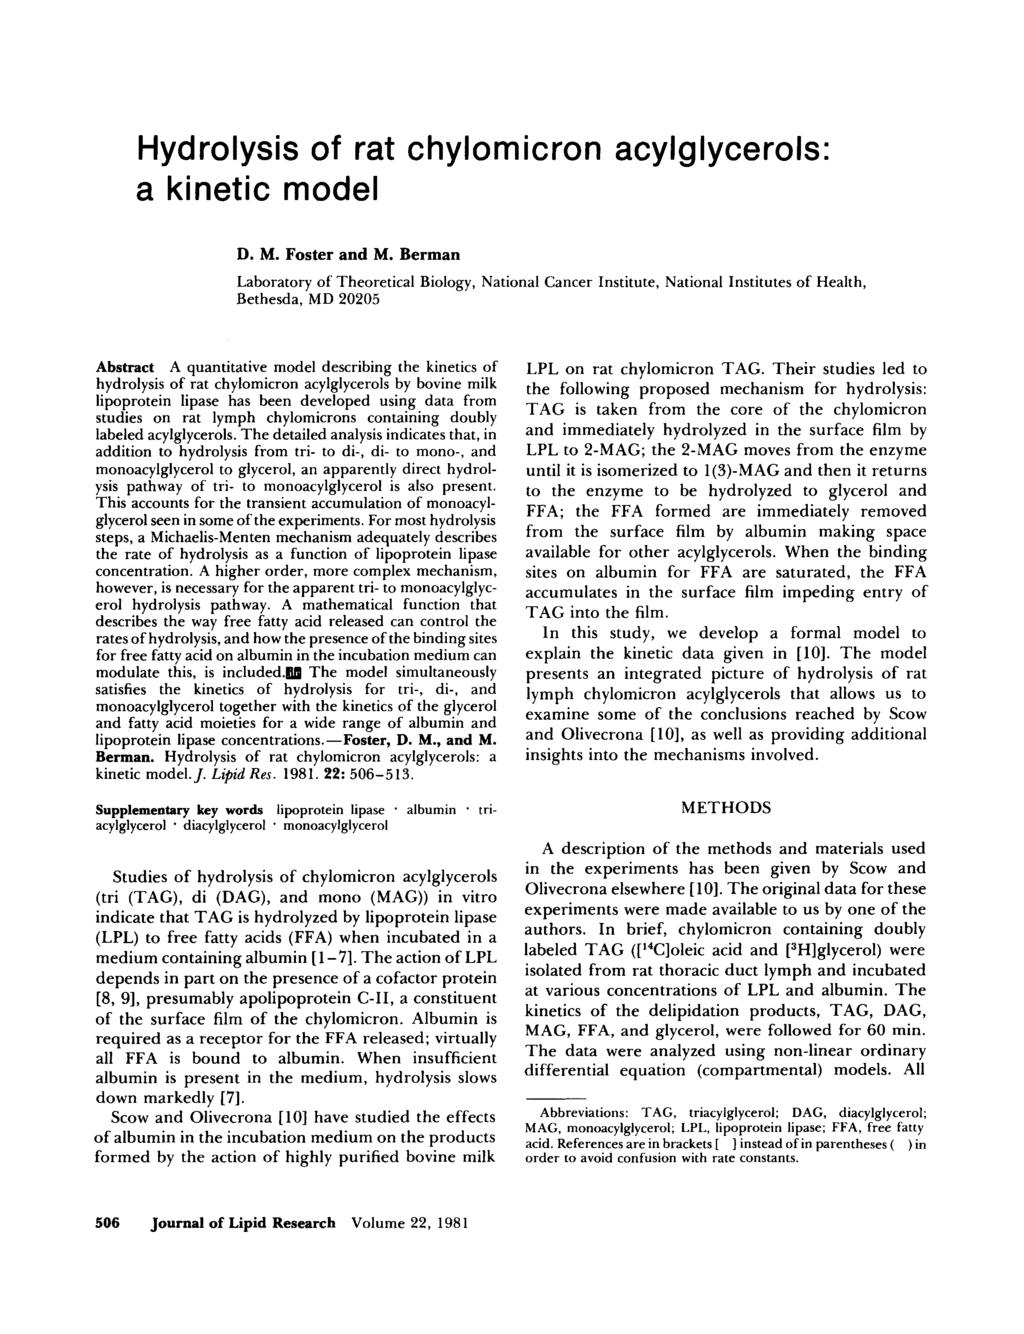 Hydrolysis of rat chylomicron acylglycerols: a kinetic model D. M. Foster and M.